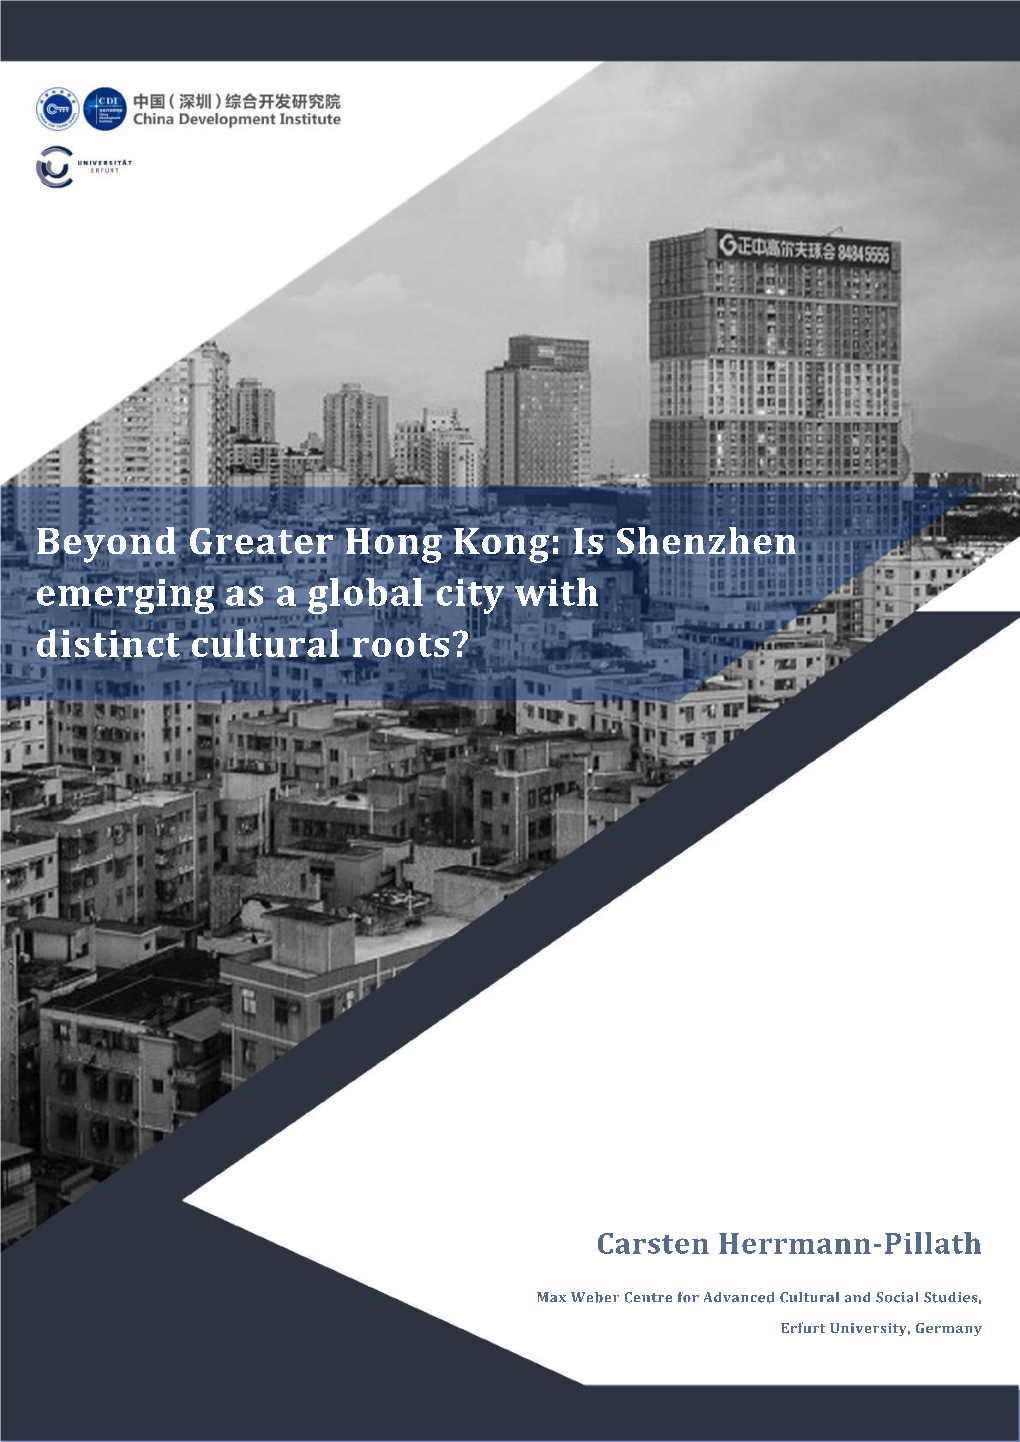 Beyond Greater Hong Kong: Is Shenzhen Emerging As a Global City with Distinct Cultural Roots?